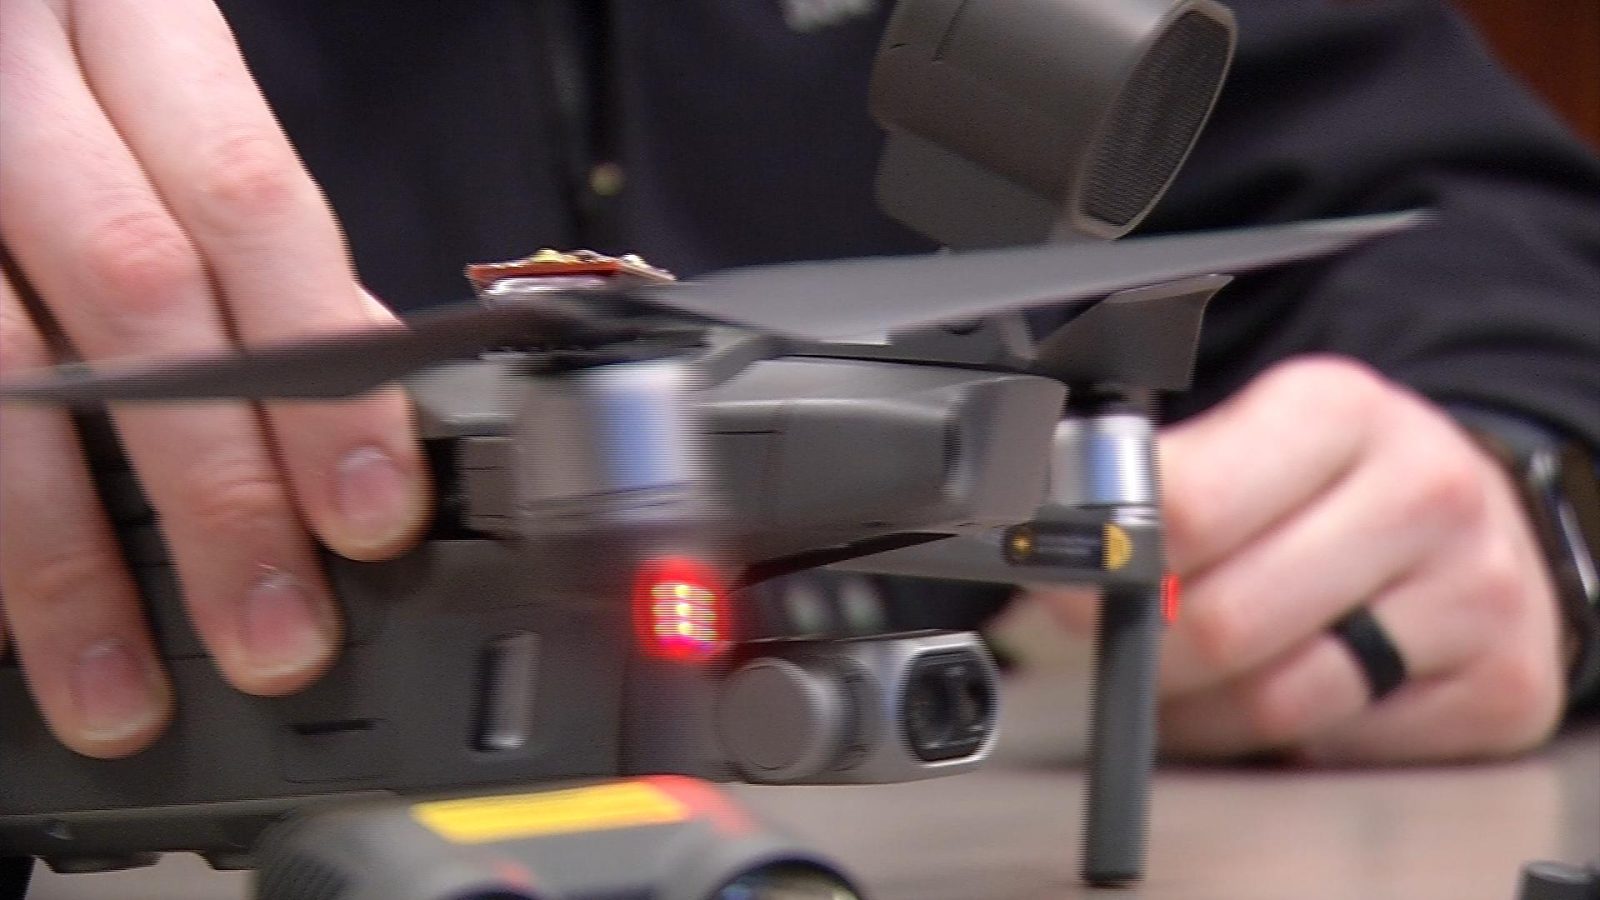 The Brooklyn Park Police Department is planning to build a drone program.